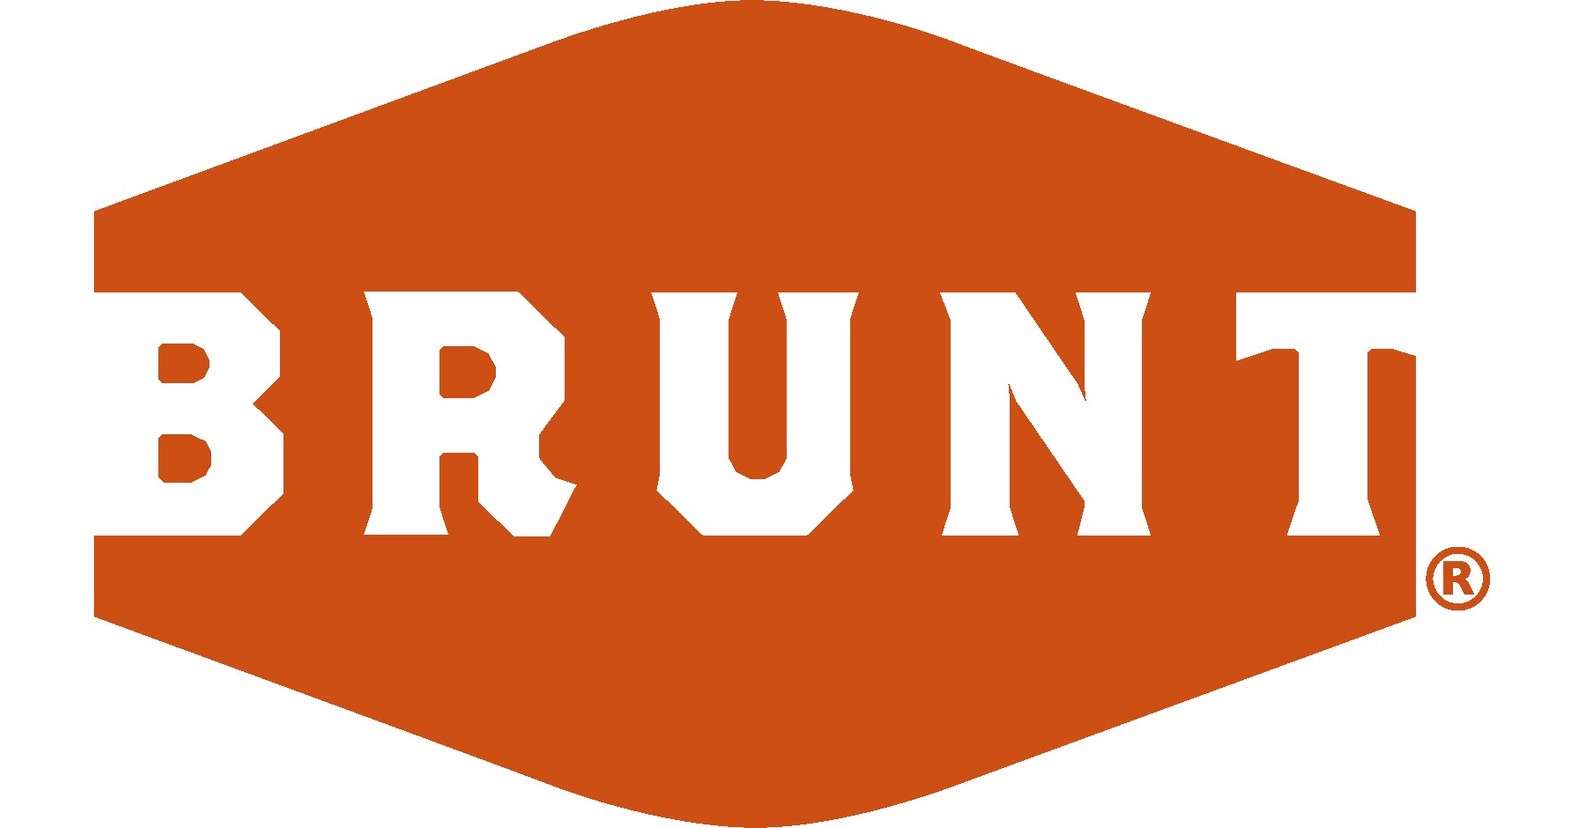 BRUNT raises $20 Million Series B To Drive Continued Growth and Push  Industry Innovation